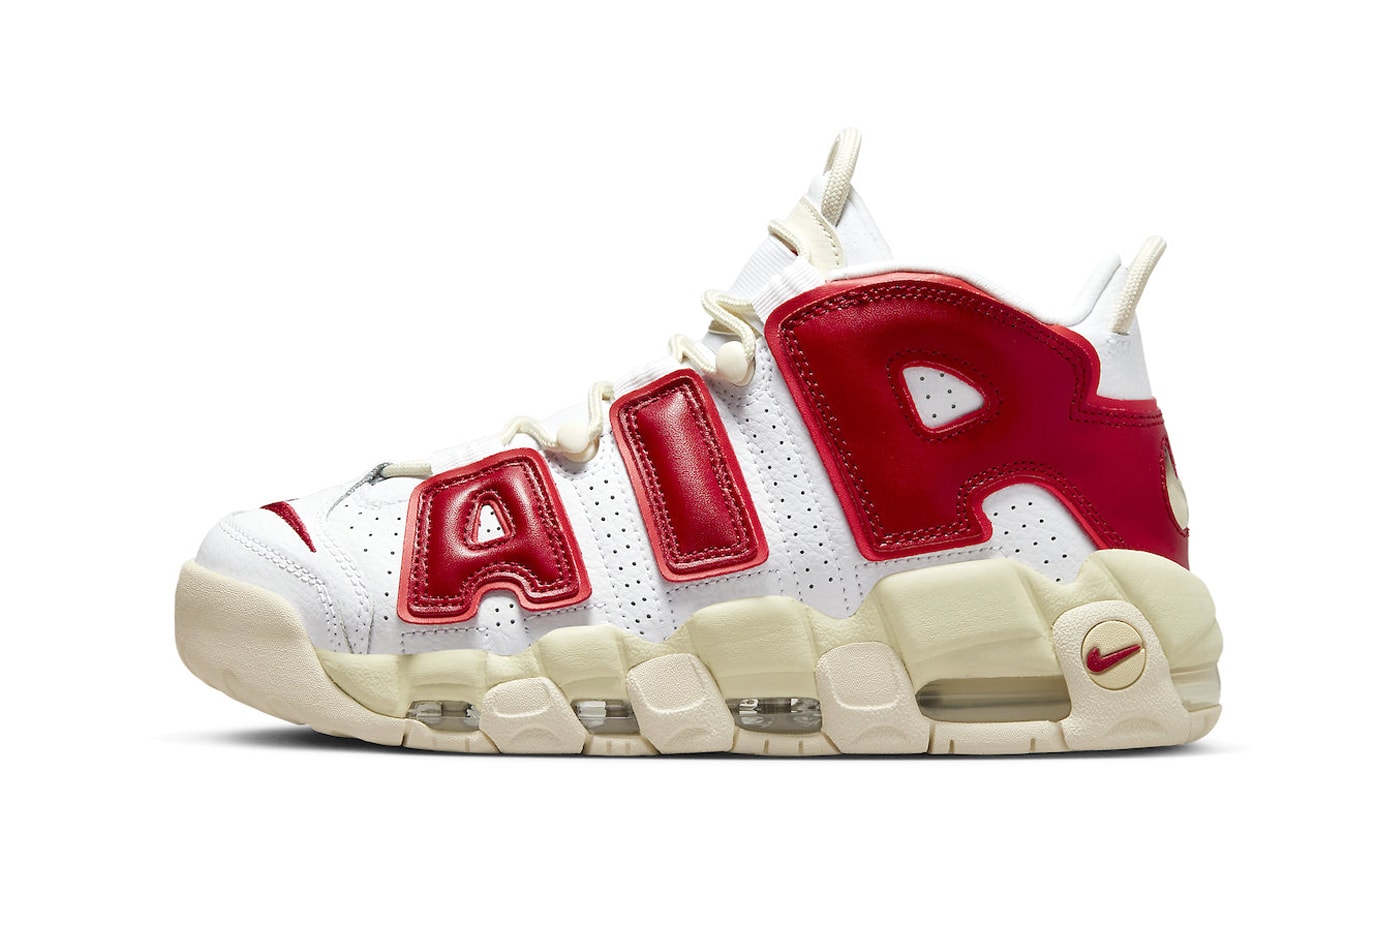 Nike Air More Uptempo Receives an Aged Iteration Featuring Bold Red Detailing FN3497-100